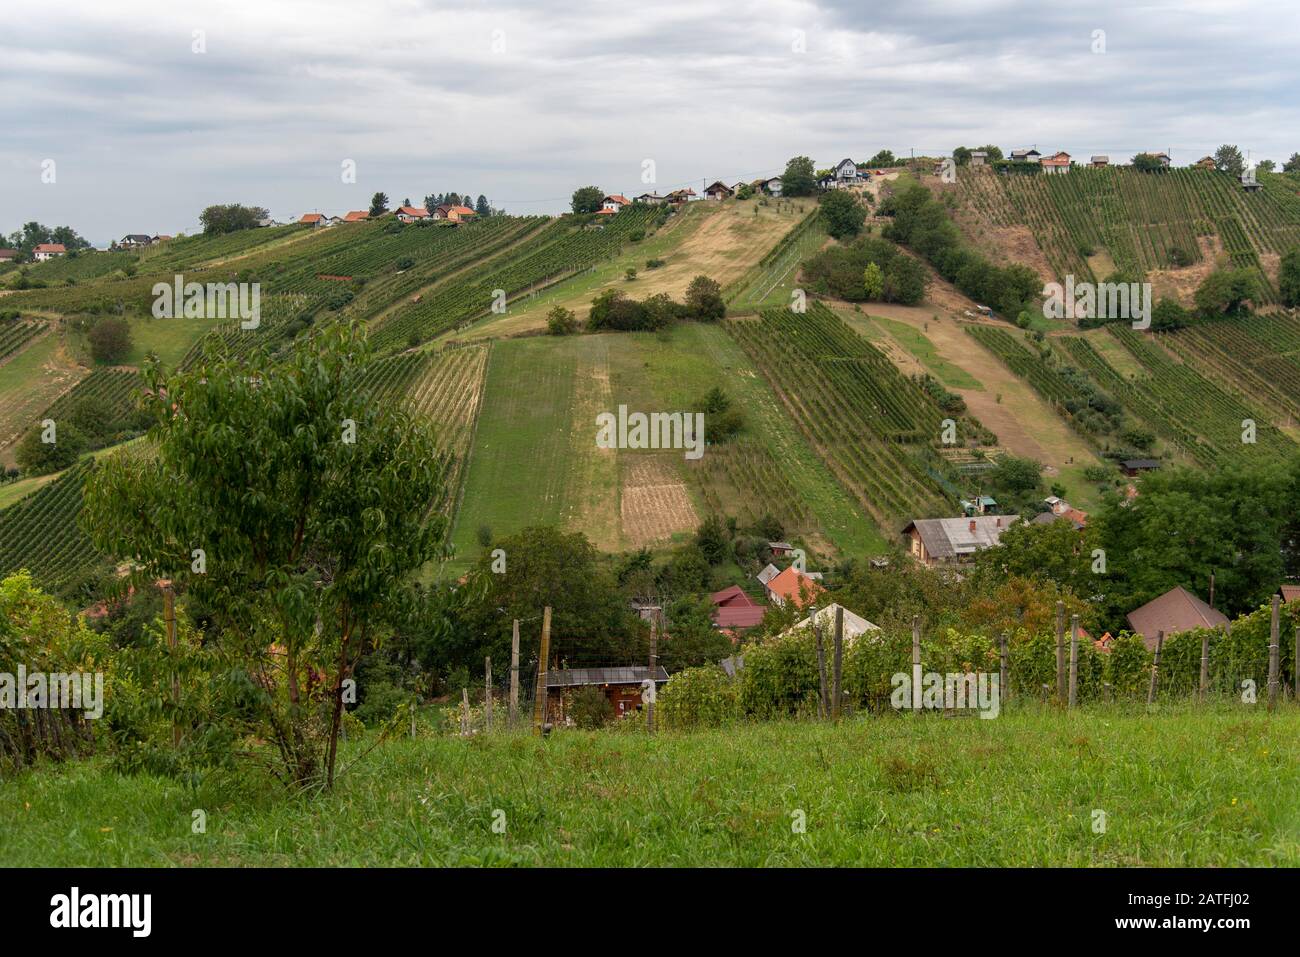 The view of Lendavske Gorice with wine yards. Aerial View Of Lendava Valley Stock Photo